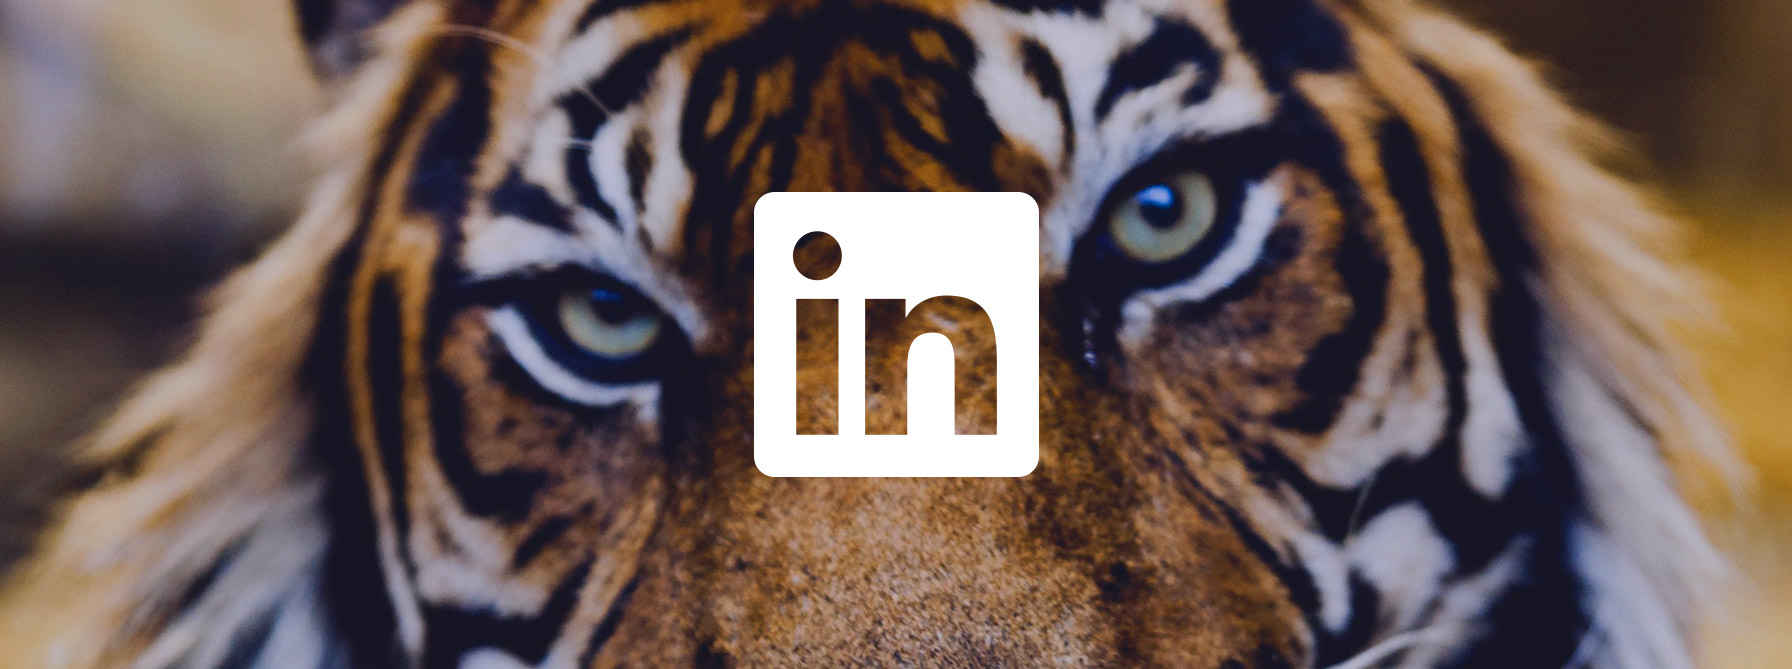 Content on LinkedIn how finance brands can win back trust